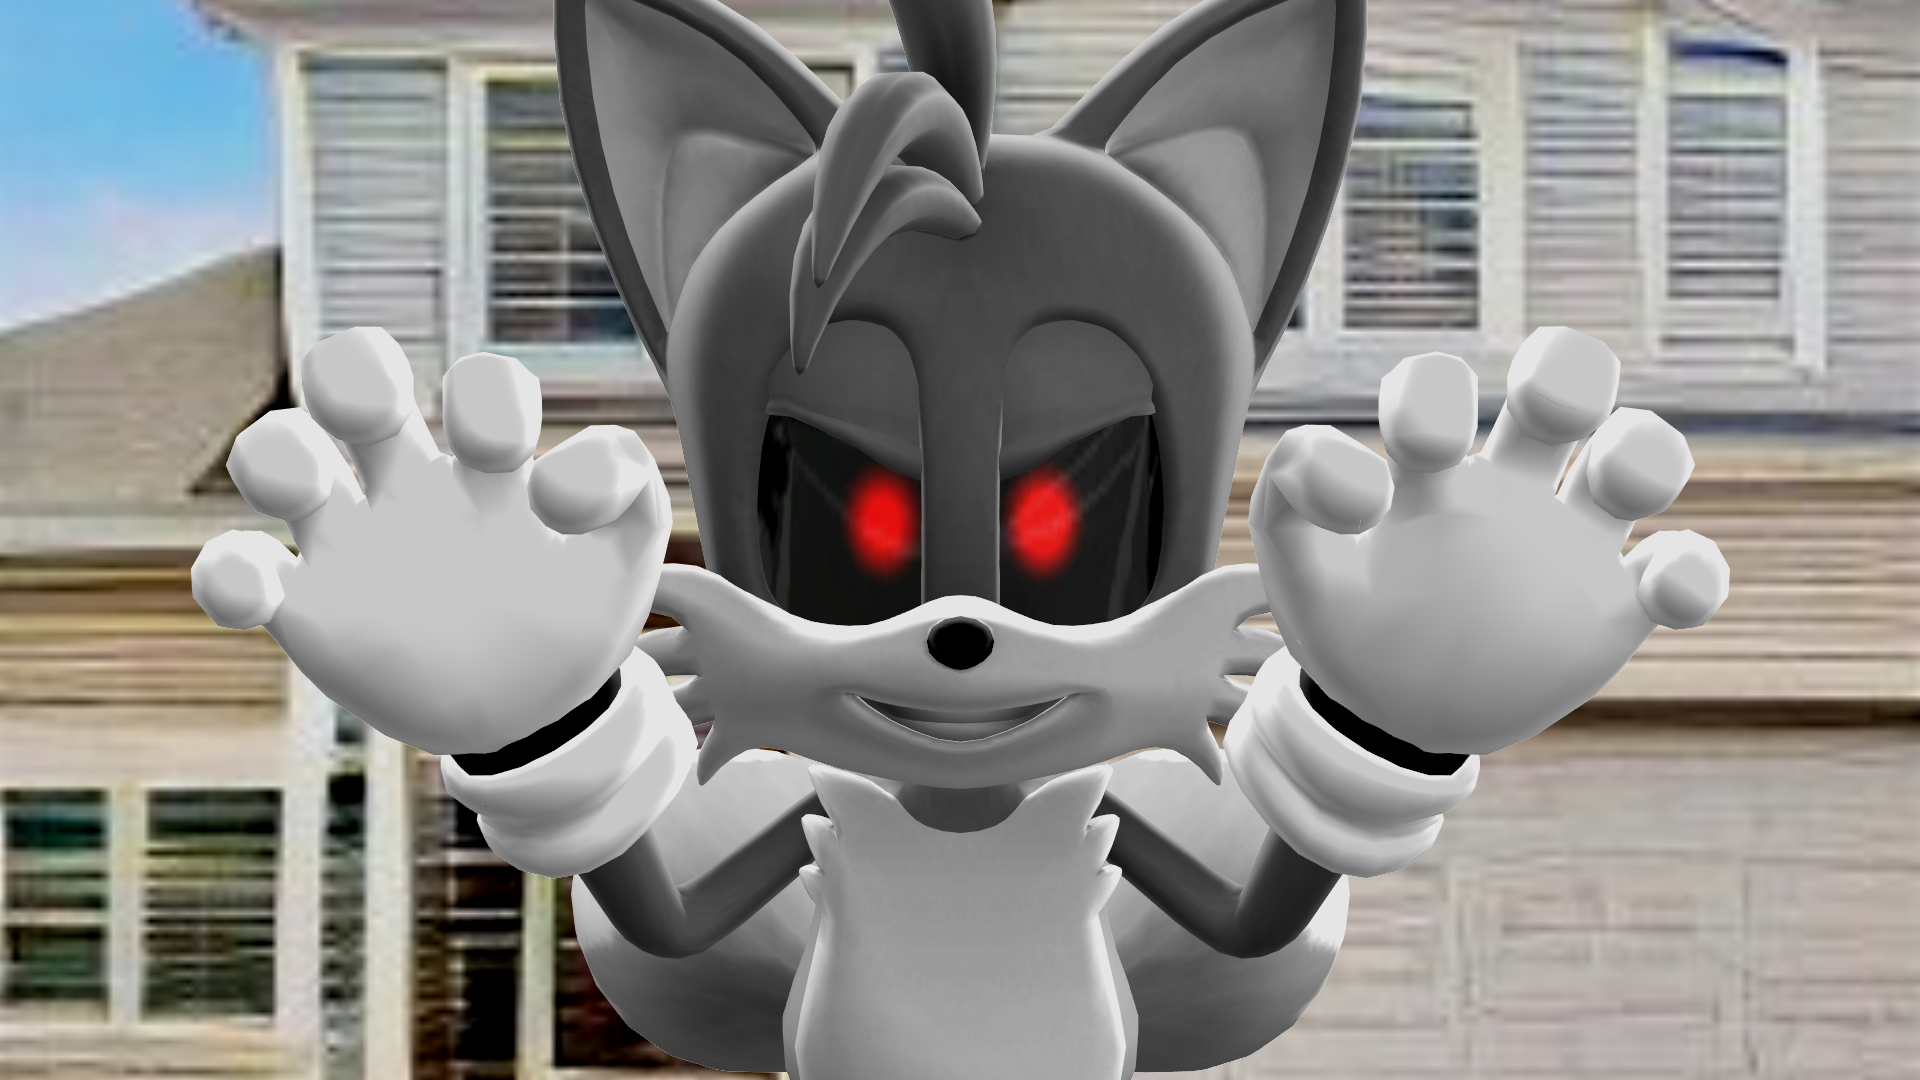 Sonic.exe x Tails by S213413 on DeviantArt